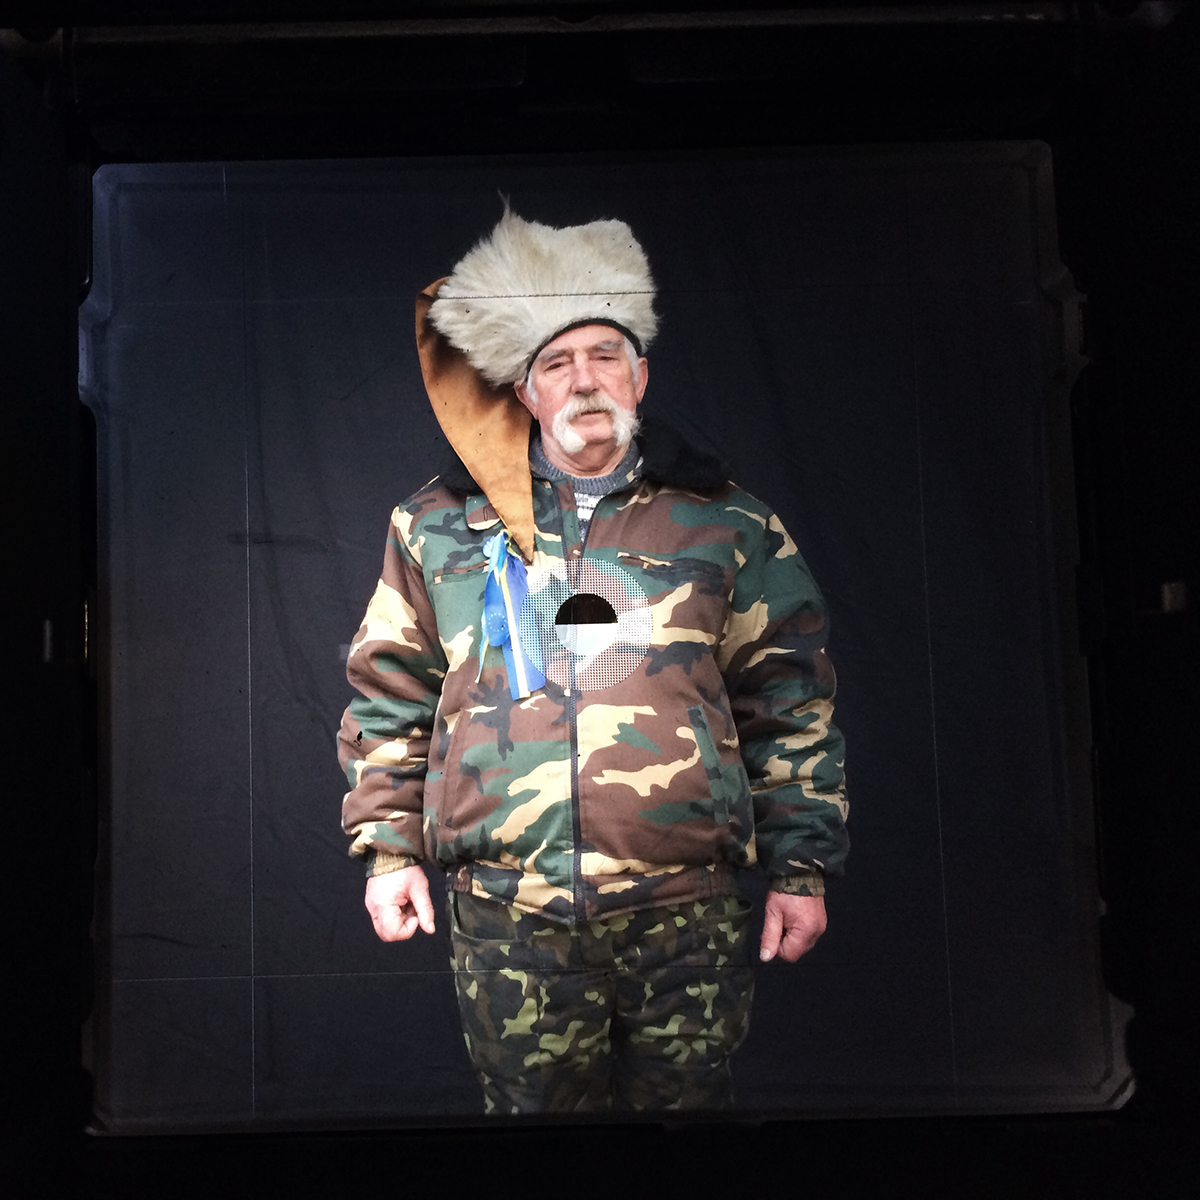 By mounting an iPhone over her viewfinder, Taylor-Lind was able to share the moments before and after photographing Talas, above, for "Maidan: Portraits from the Black Square"